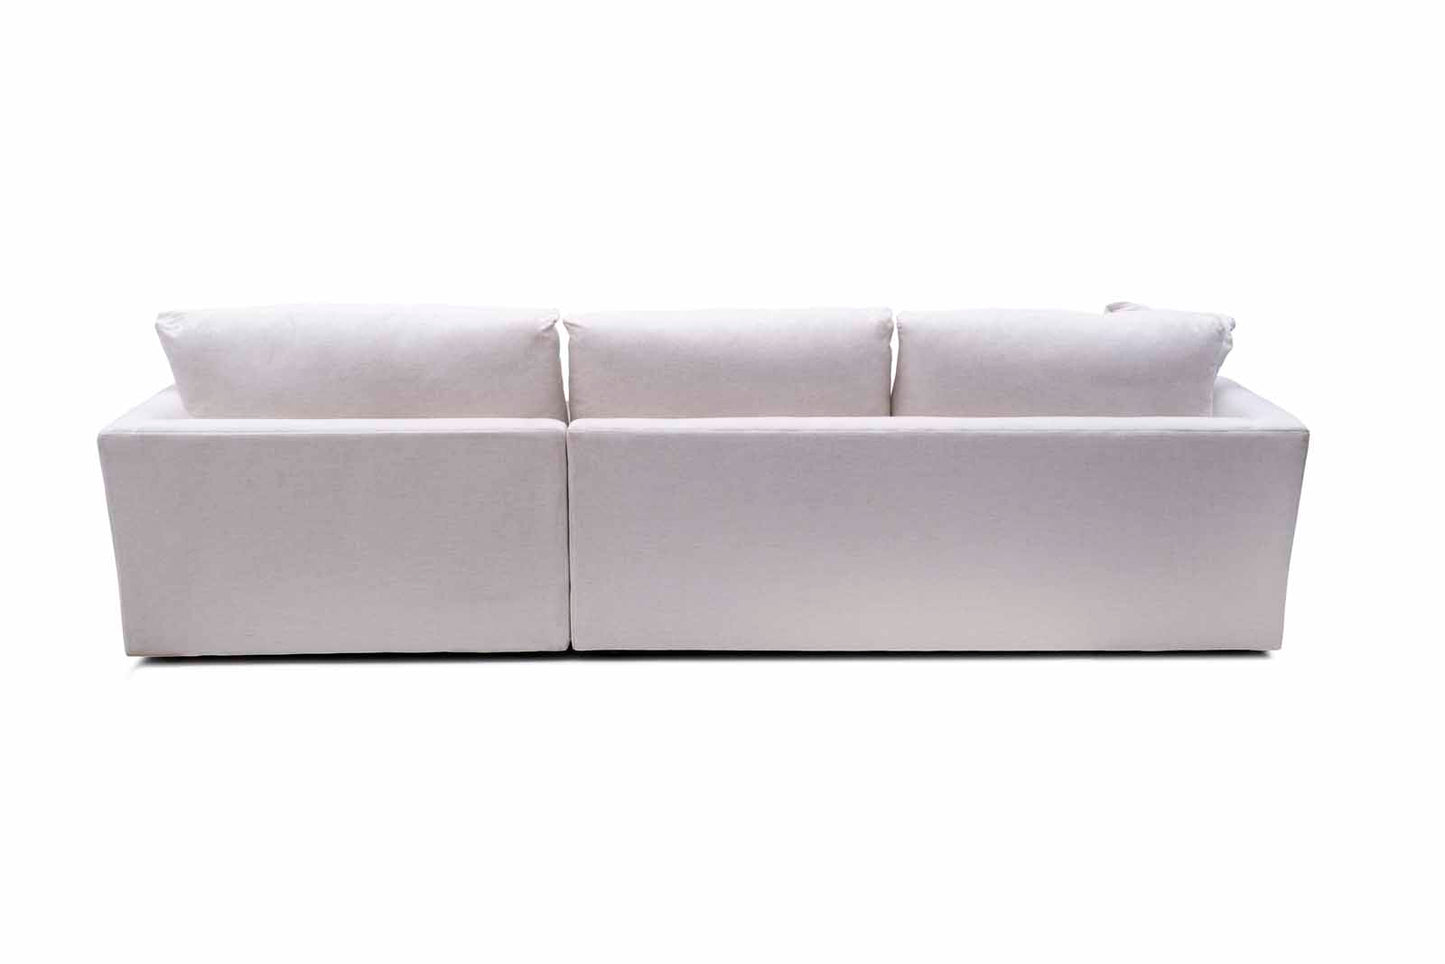 Vilano Sofa with Chaise in Nomad Snow